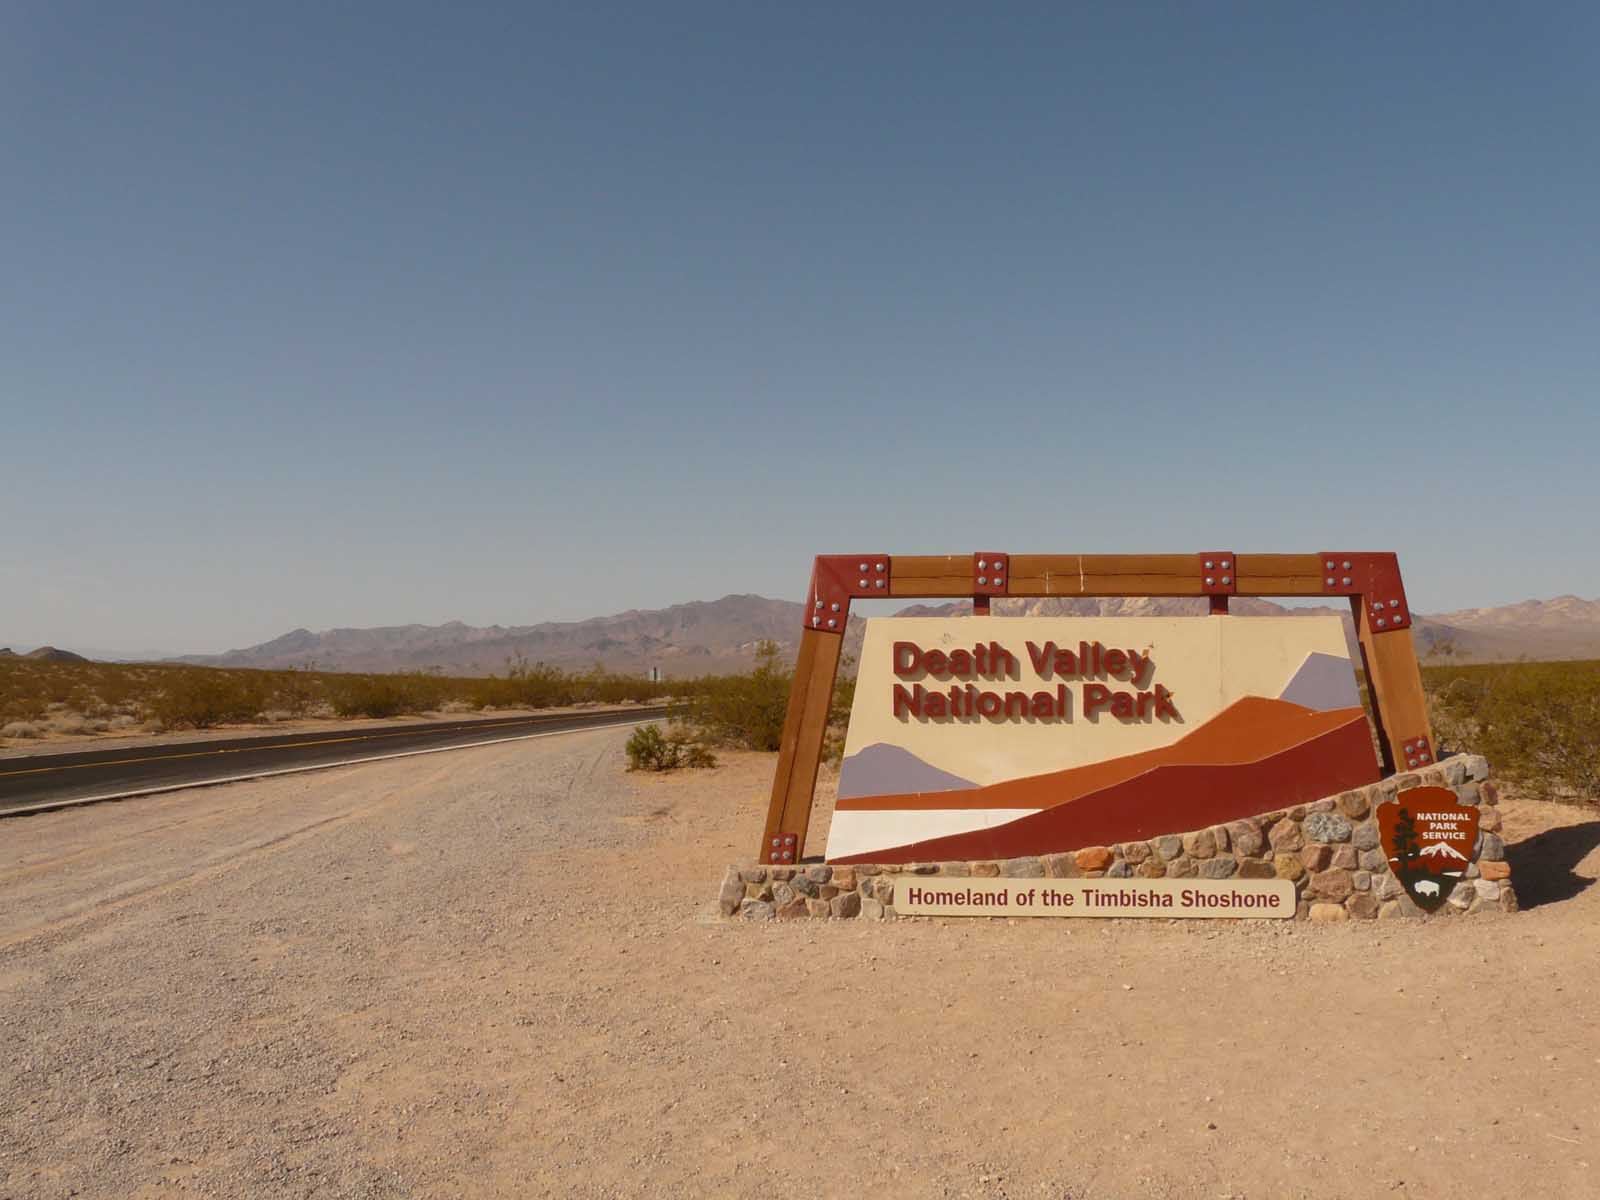 Things to do in Death Valley National Park How to get there